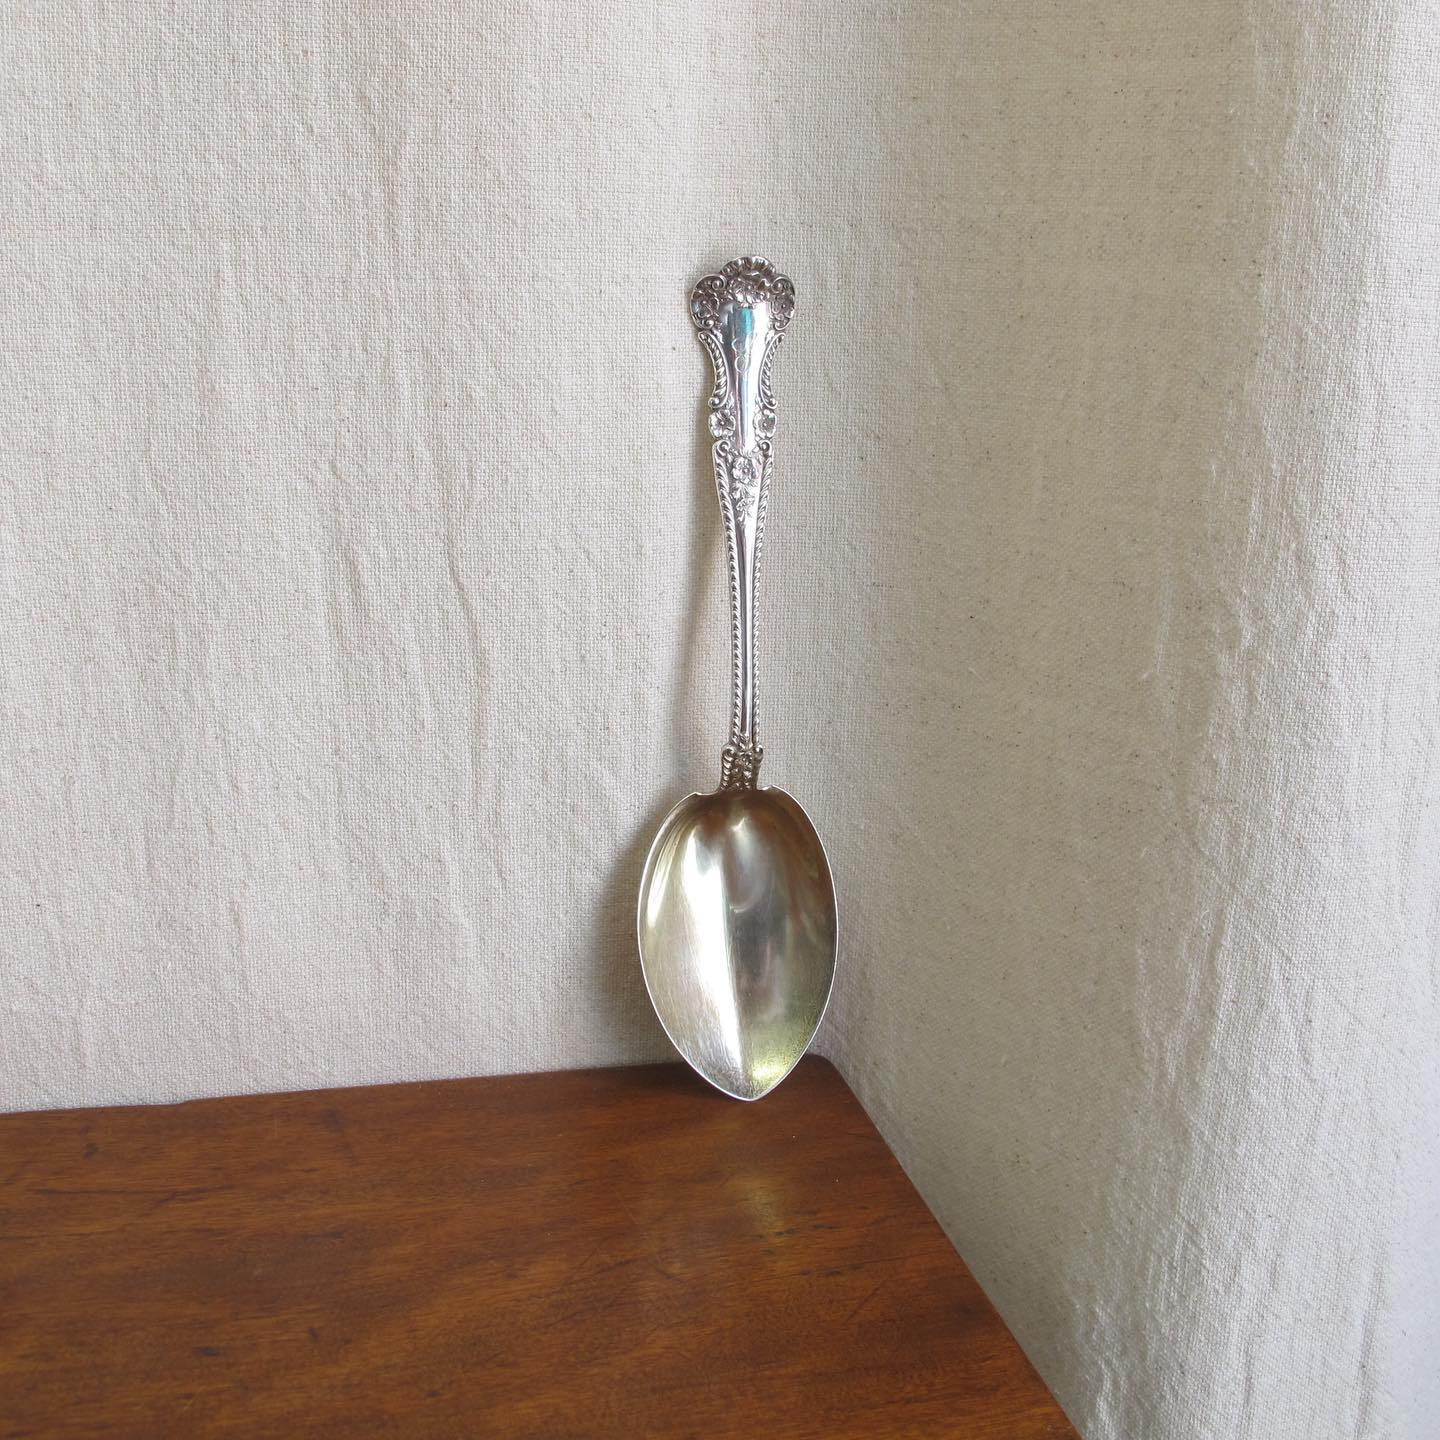 Large Victorian Gorham sterling silver ‘Cambridge’ salad or serving spoon, lobed bowl with remnants of a gold wash, dated 1899